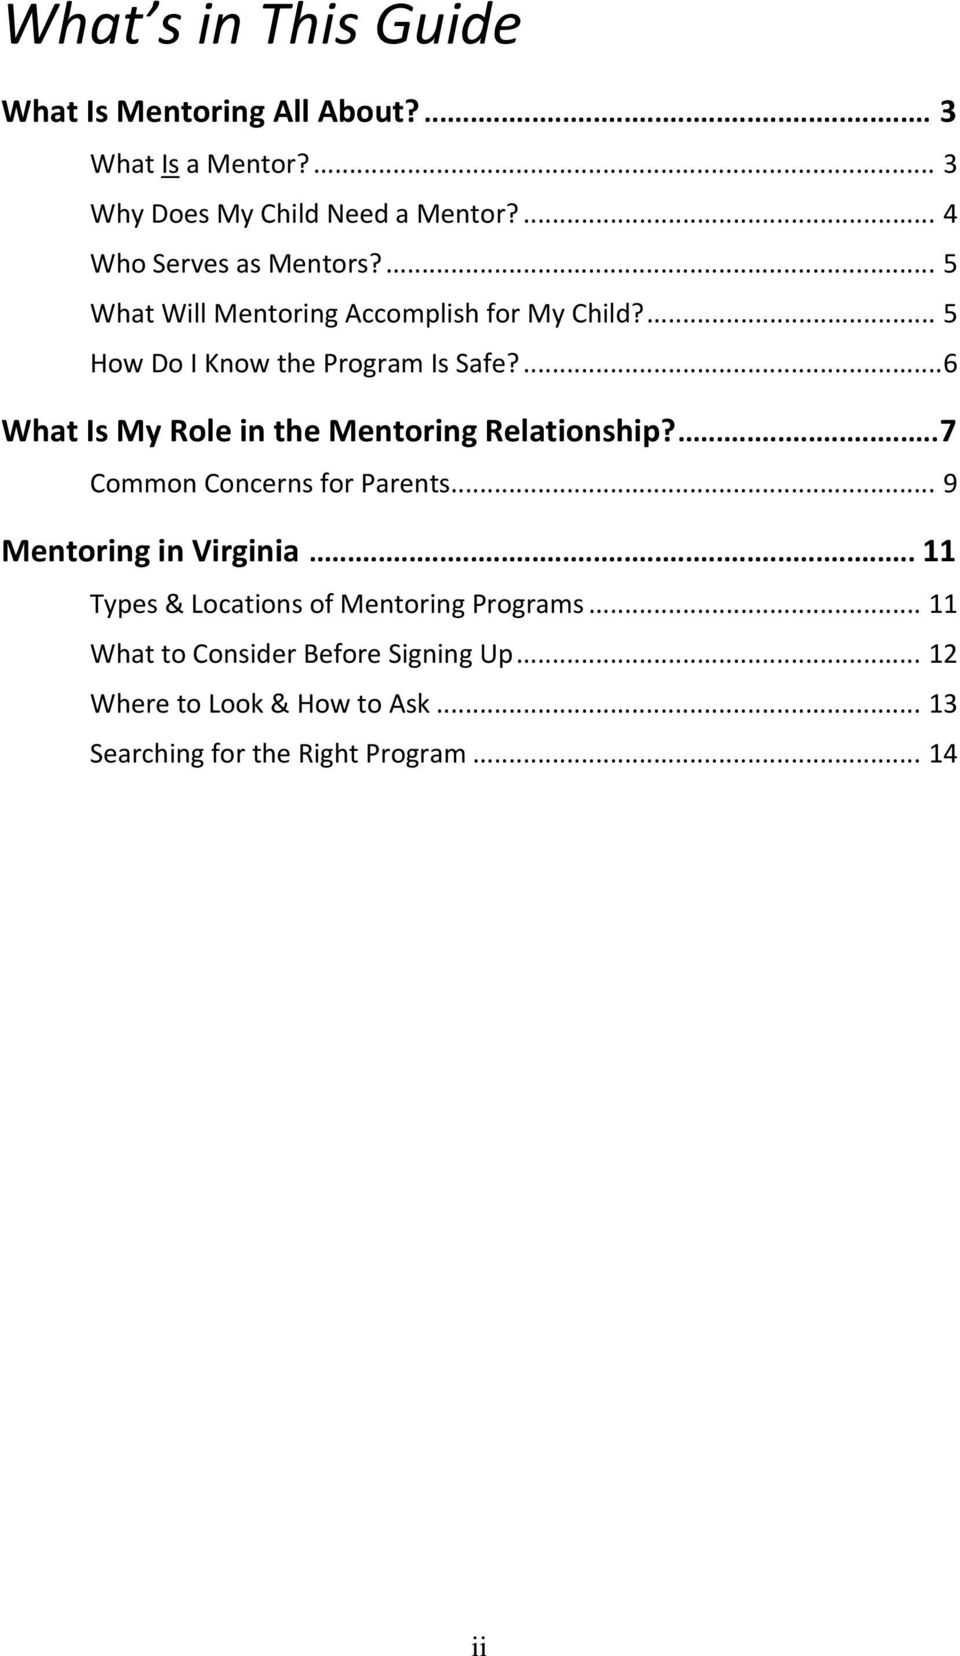 ... 6 What Is My Role in the Mentoring Relationship?... 7 Common Concerns for Parents... 9 Mentoring in Virginia.